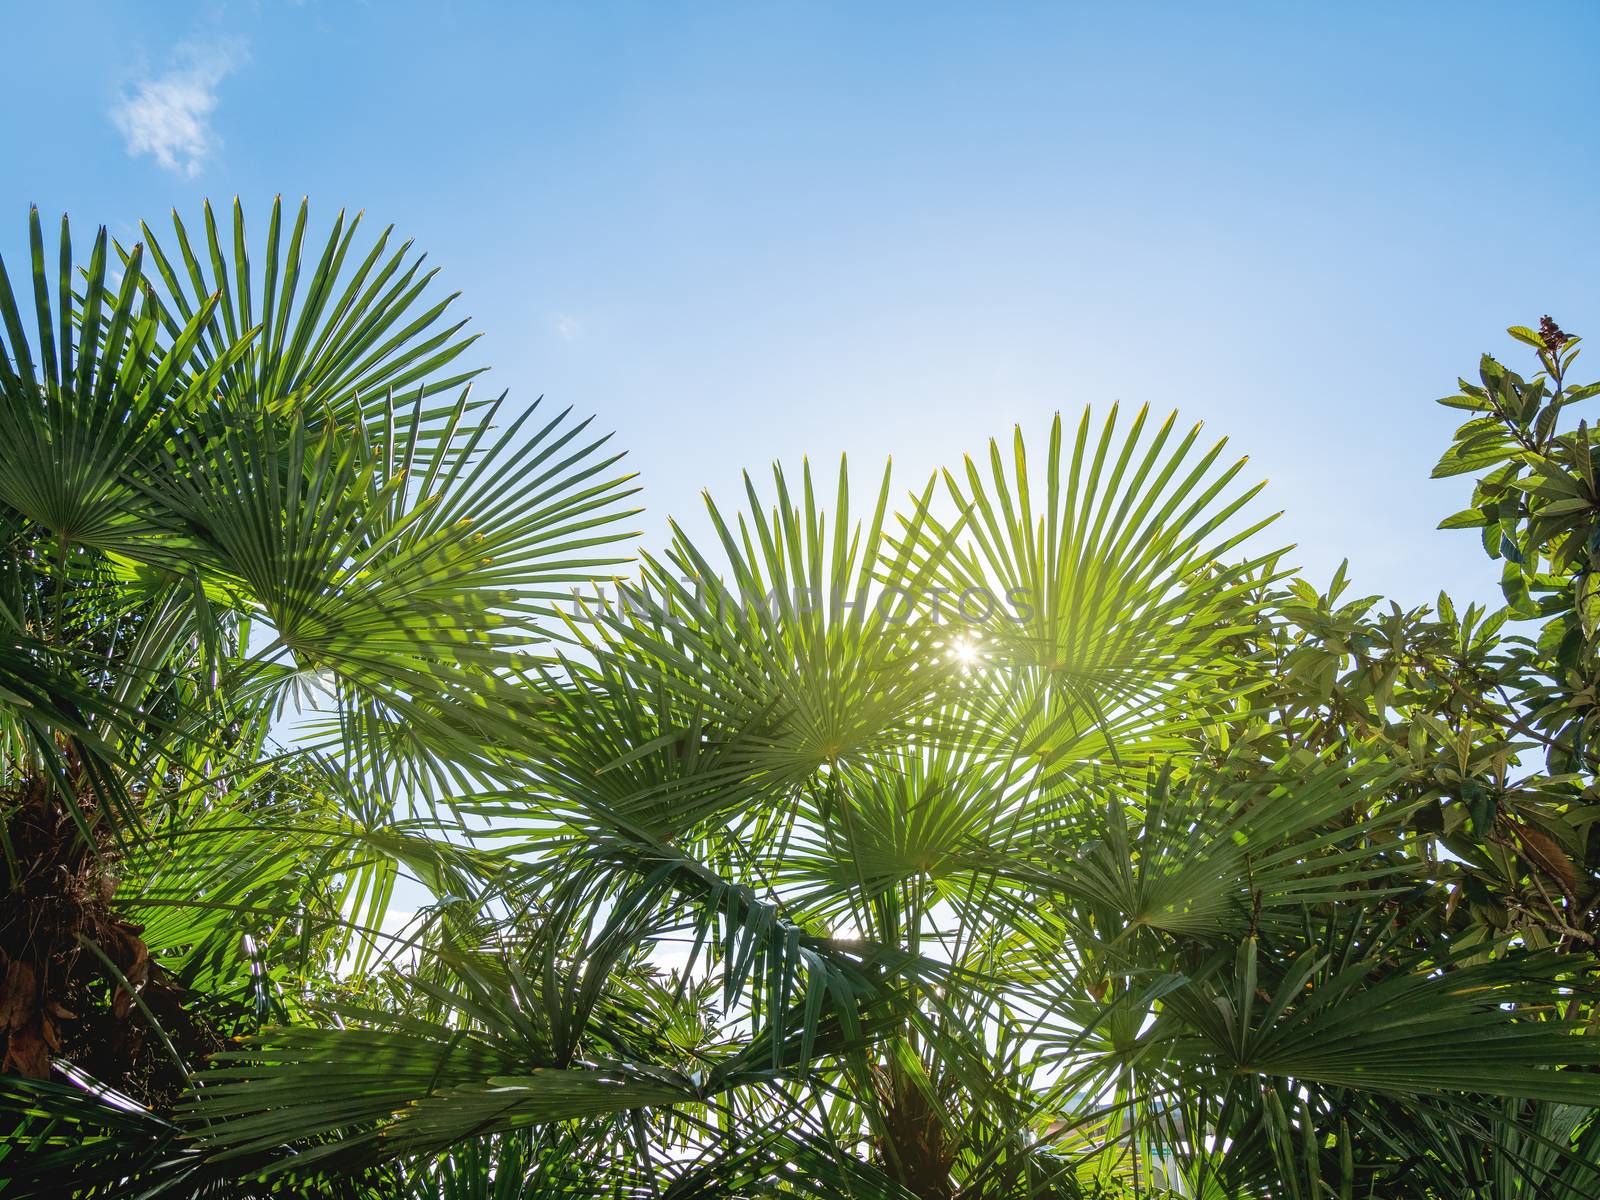 Sun shines on palm trees leaves. Tropical trees with fresh green foliage. by aksenovko